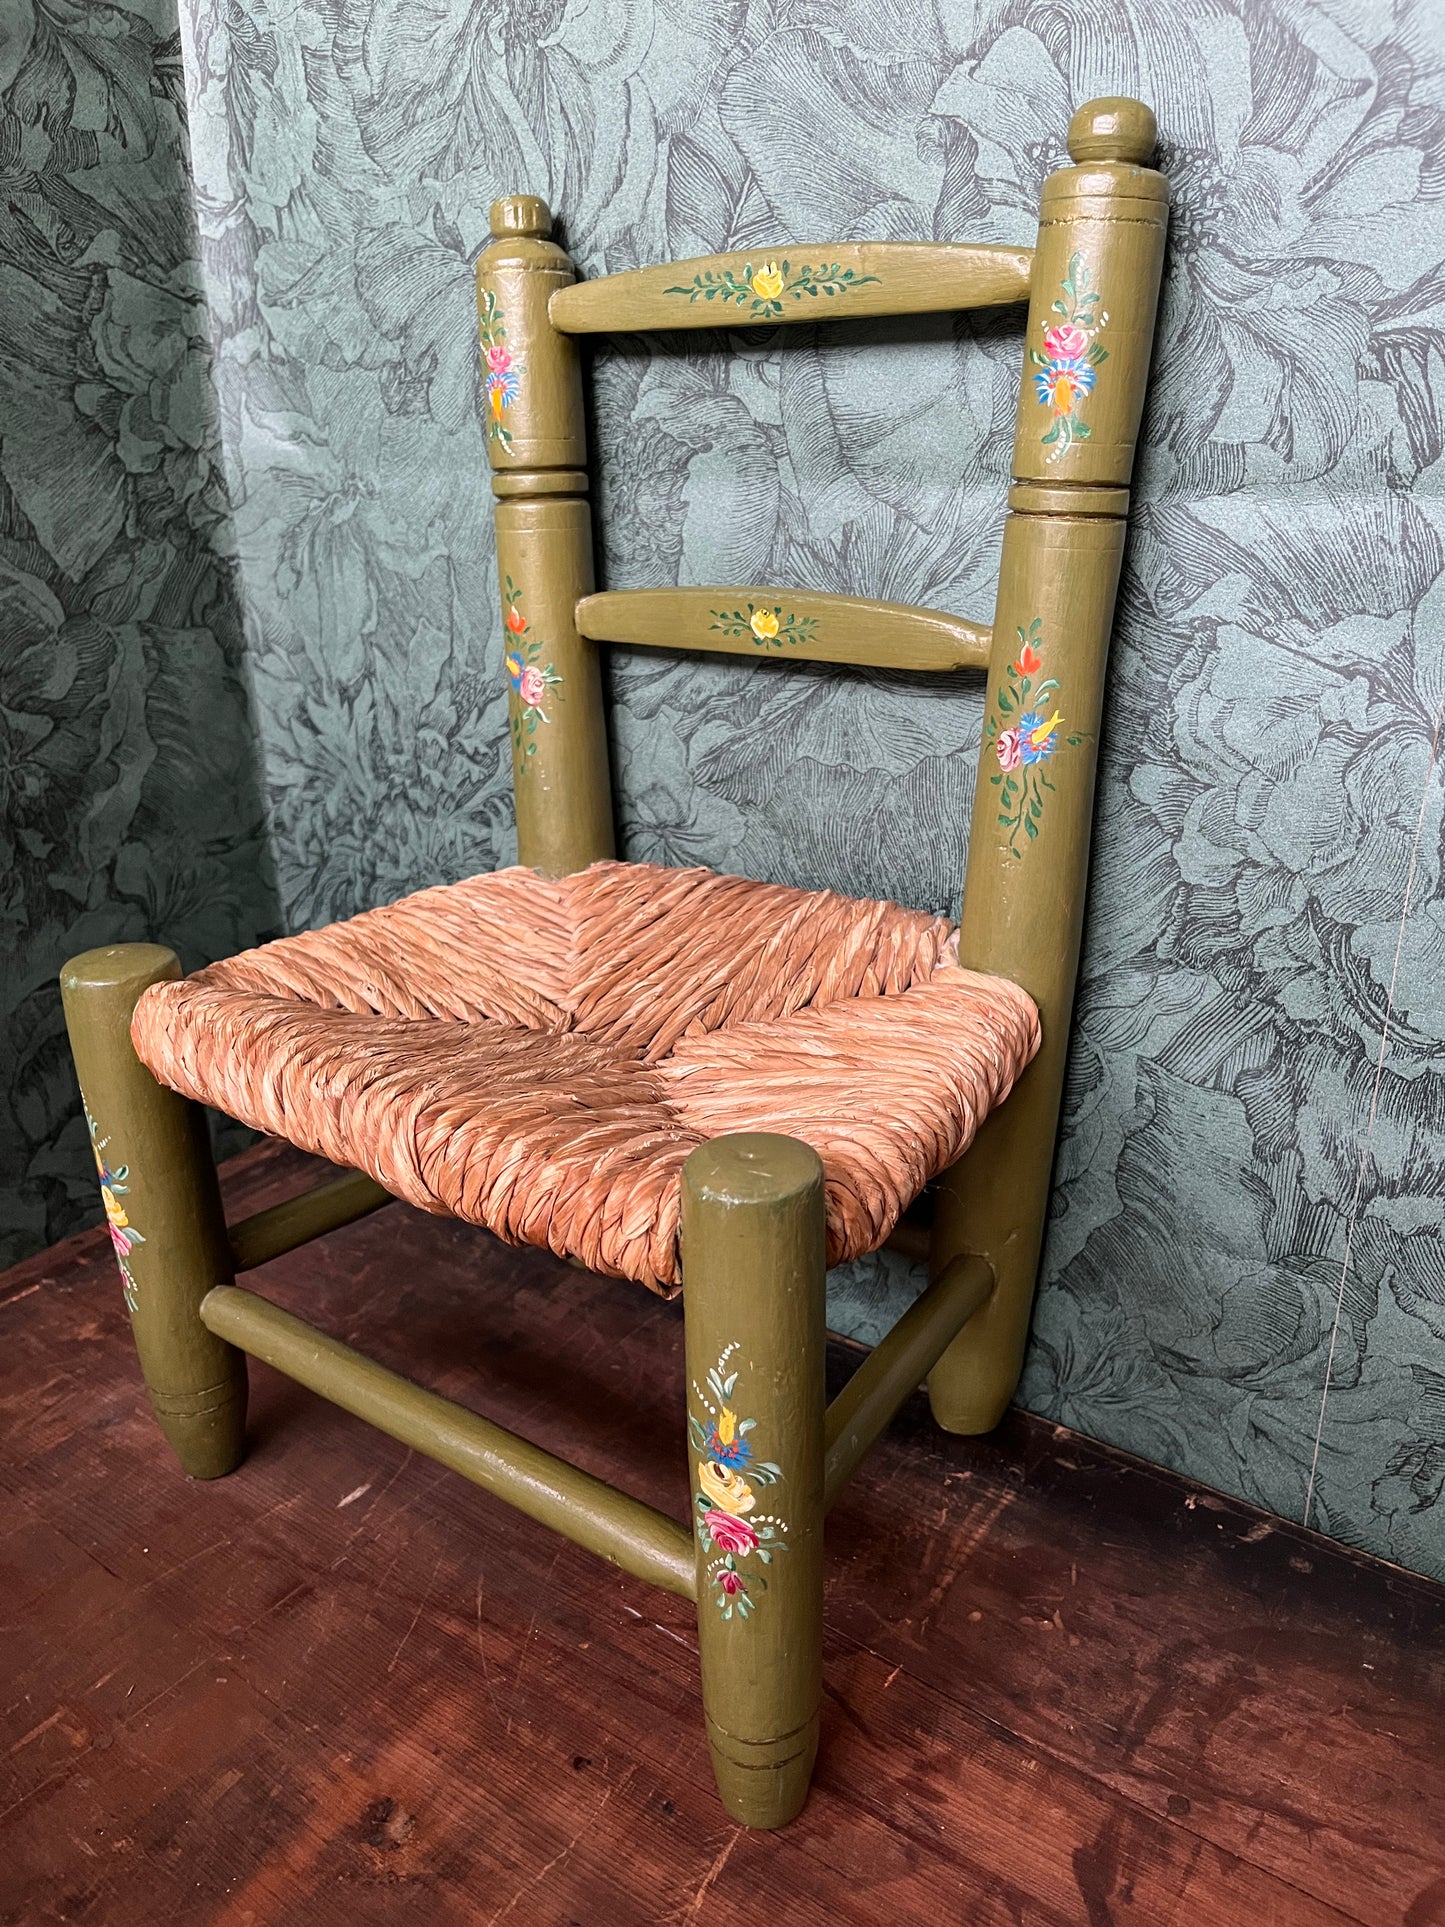 Hand-painted children's chair